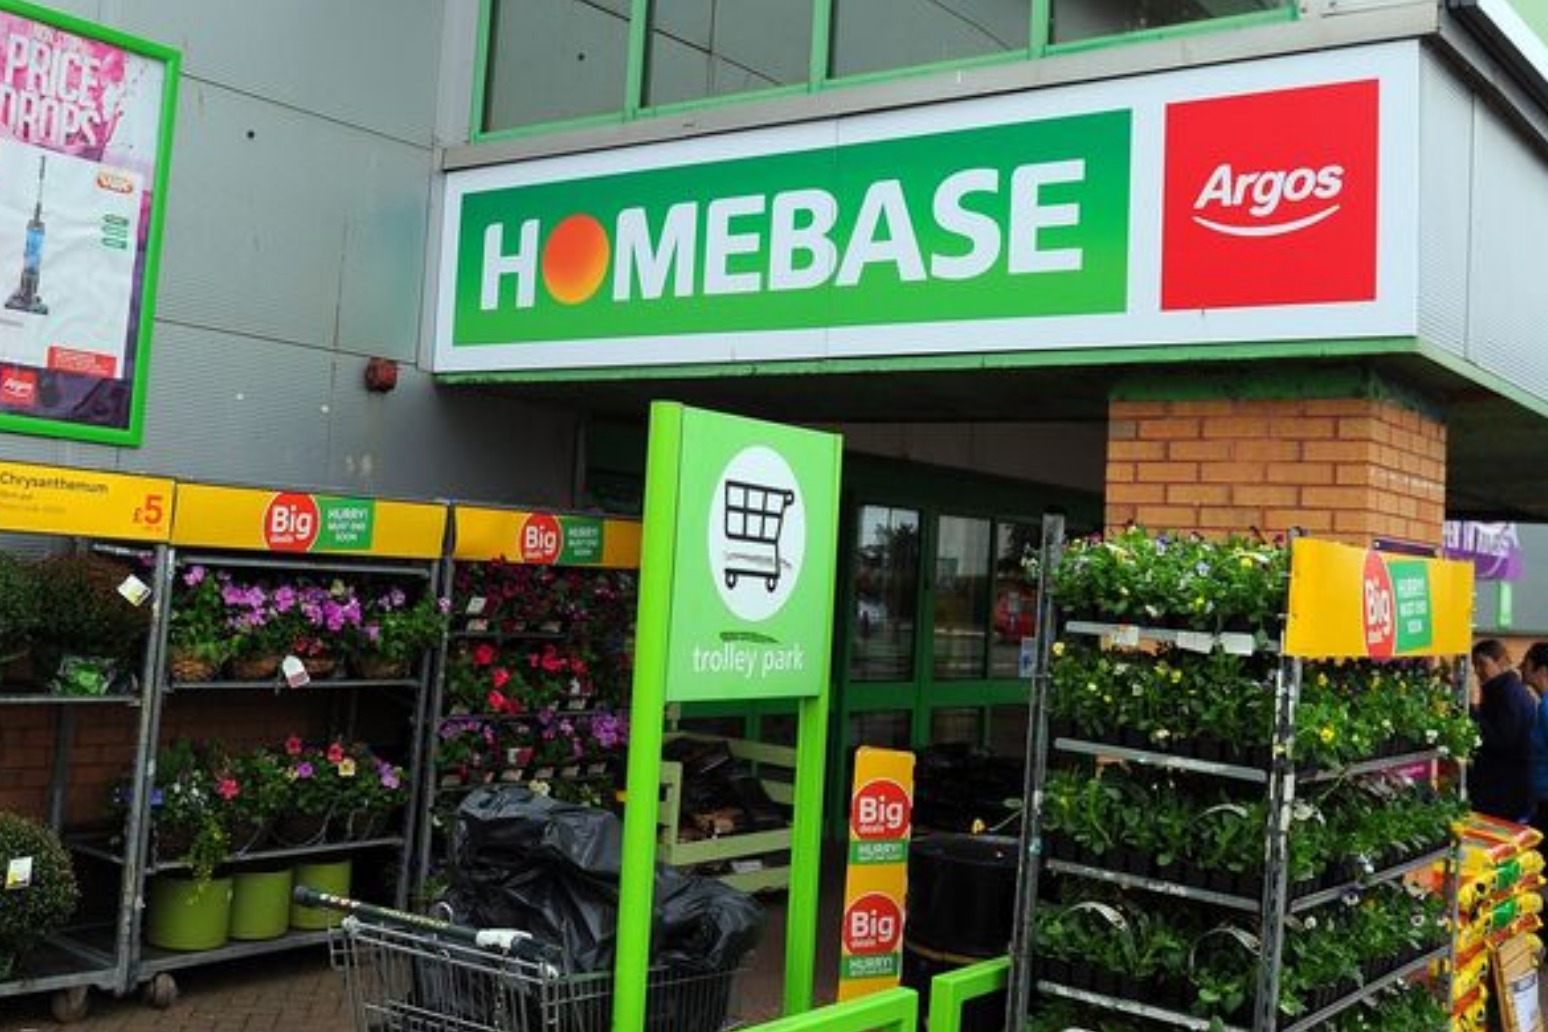 Wesfarmers sells Homebase for £1 two years after buying it 